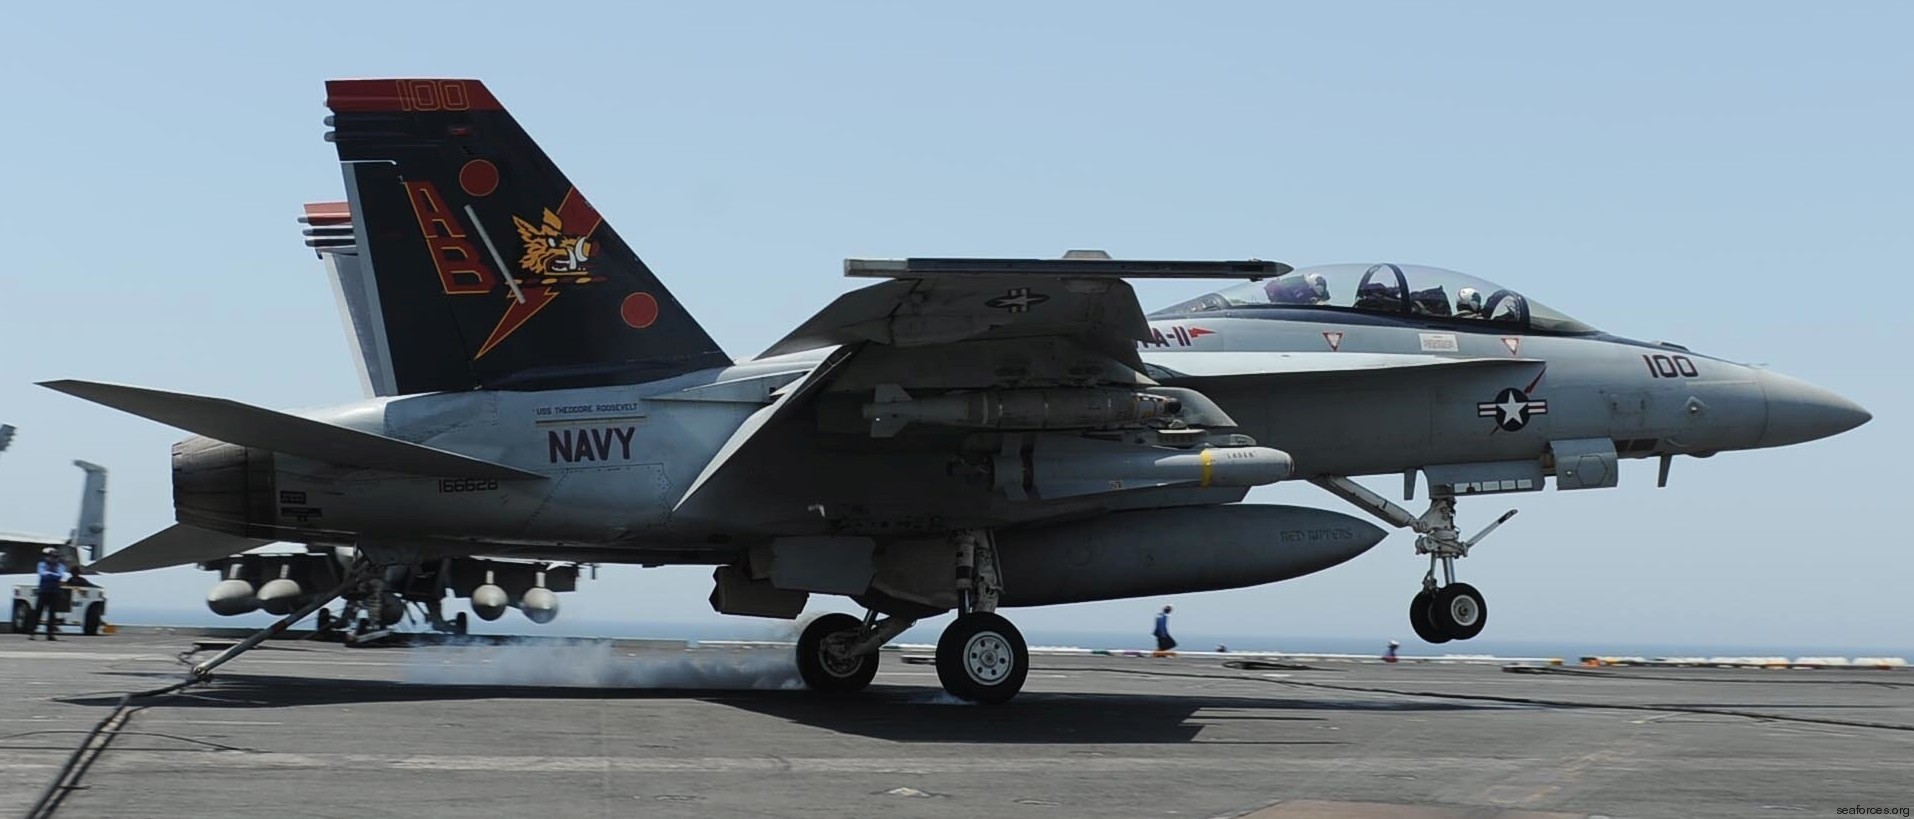 vfa-11 red rippers strike fighter squadron us navy f/a-18f super hornet carrier air wing cvw-1 uss theodore roosevelt cvn-71 20